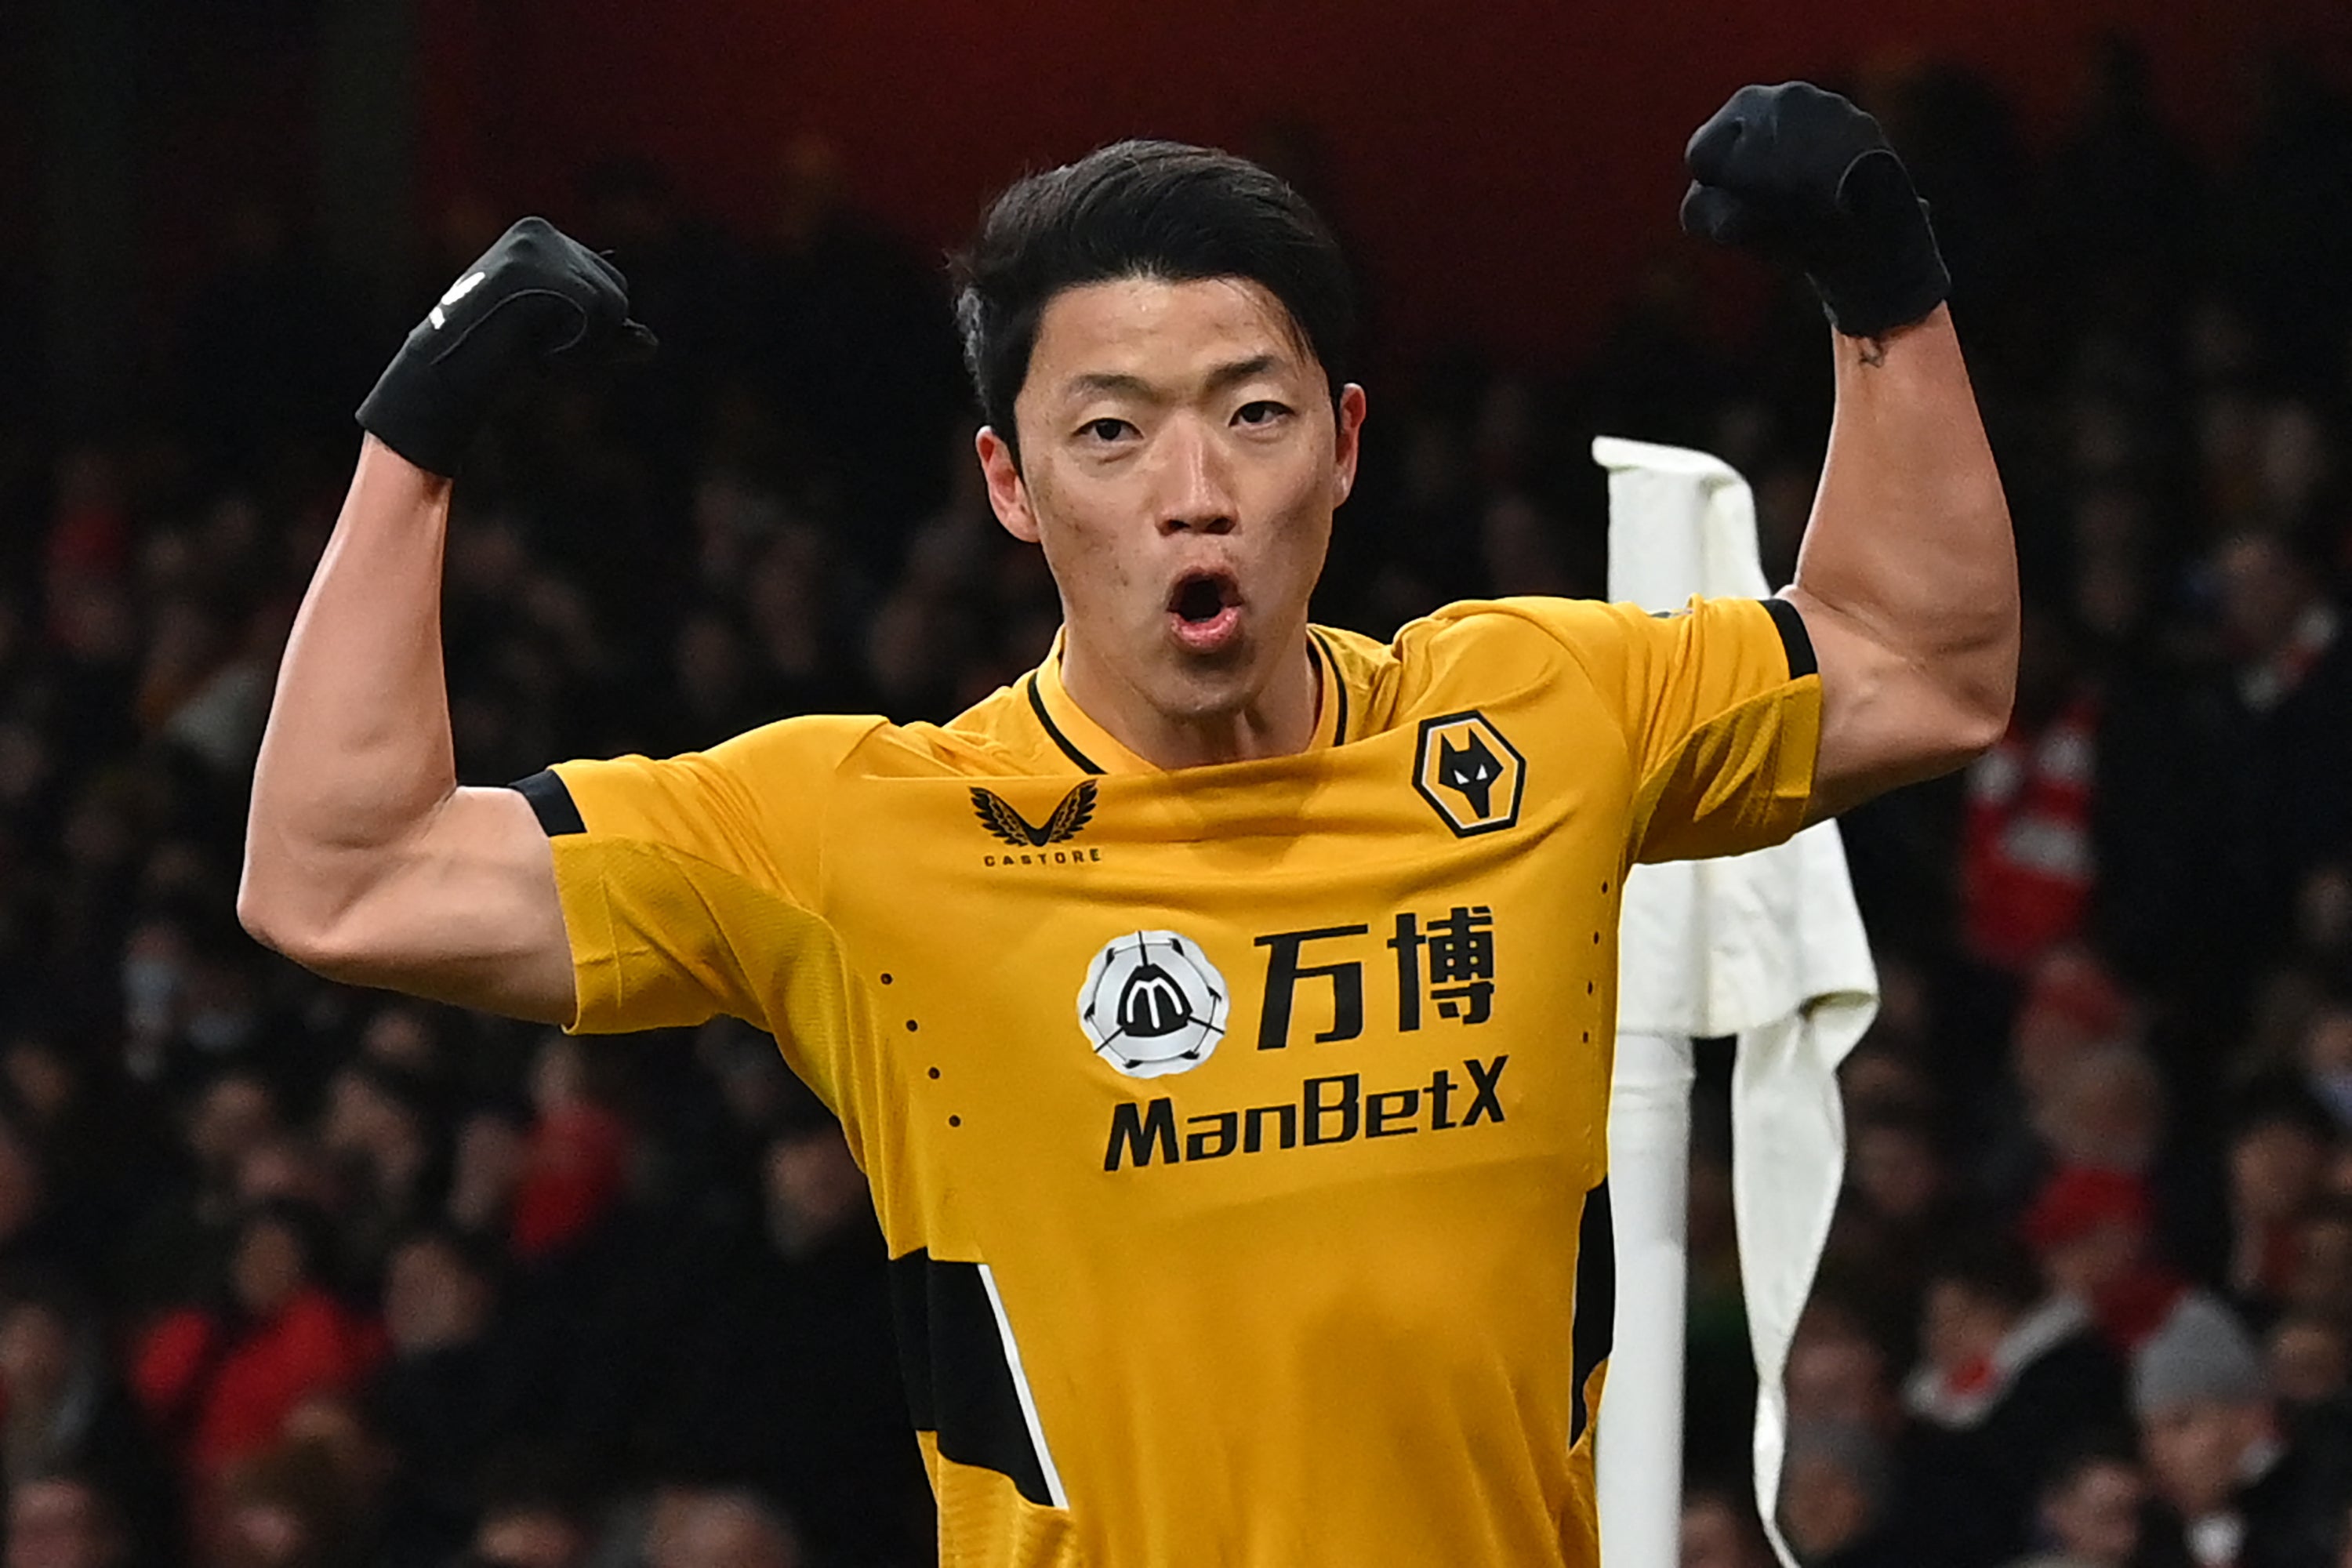 Hwang Hee-chan opened the scoring for Wolves